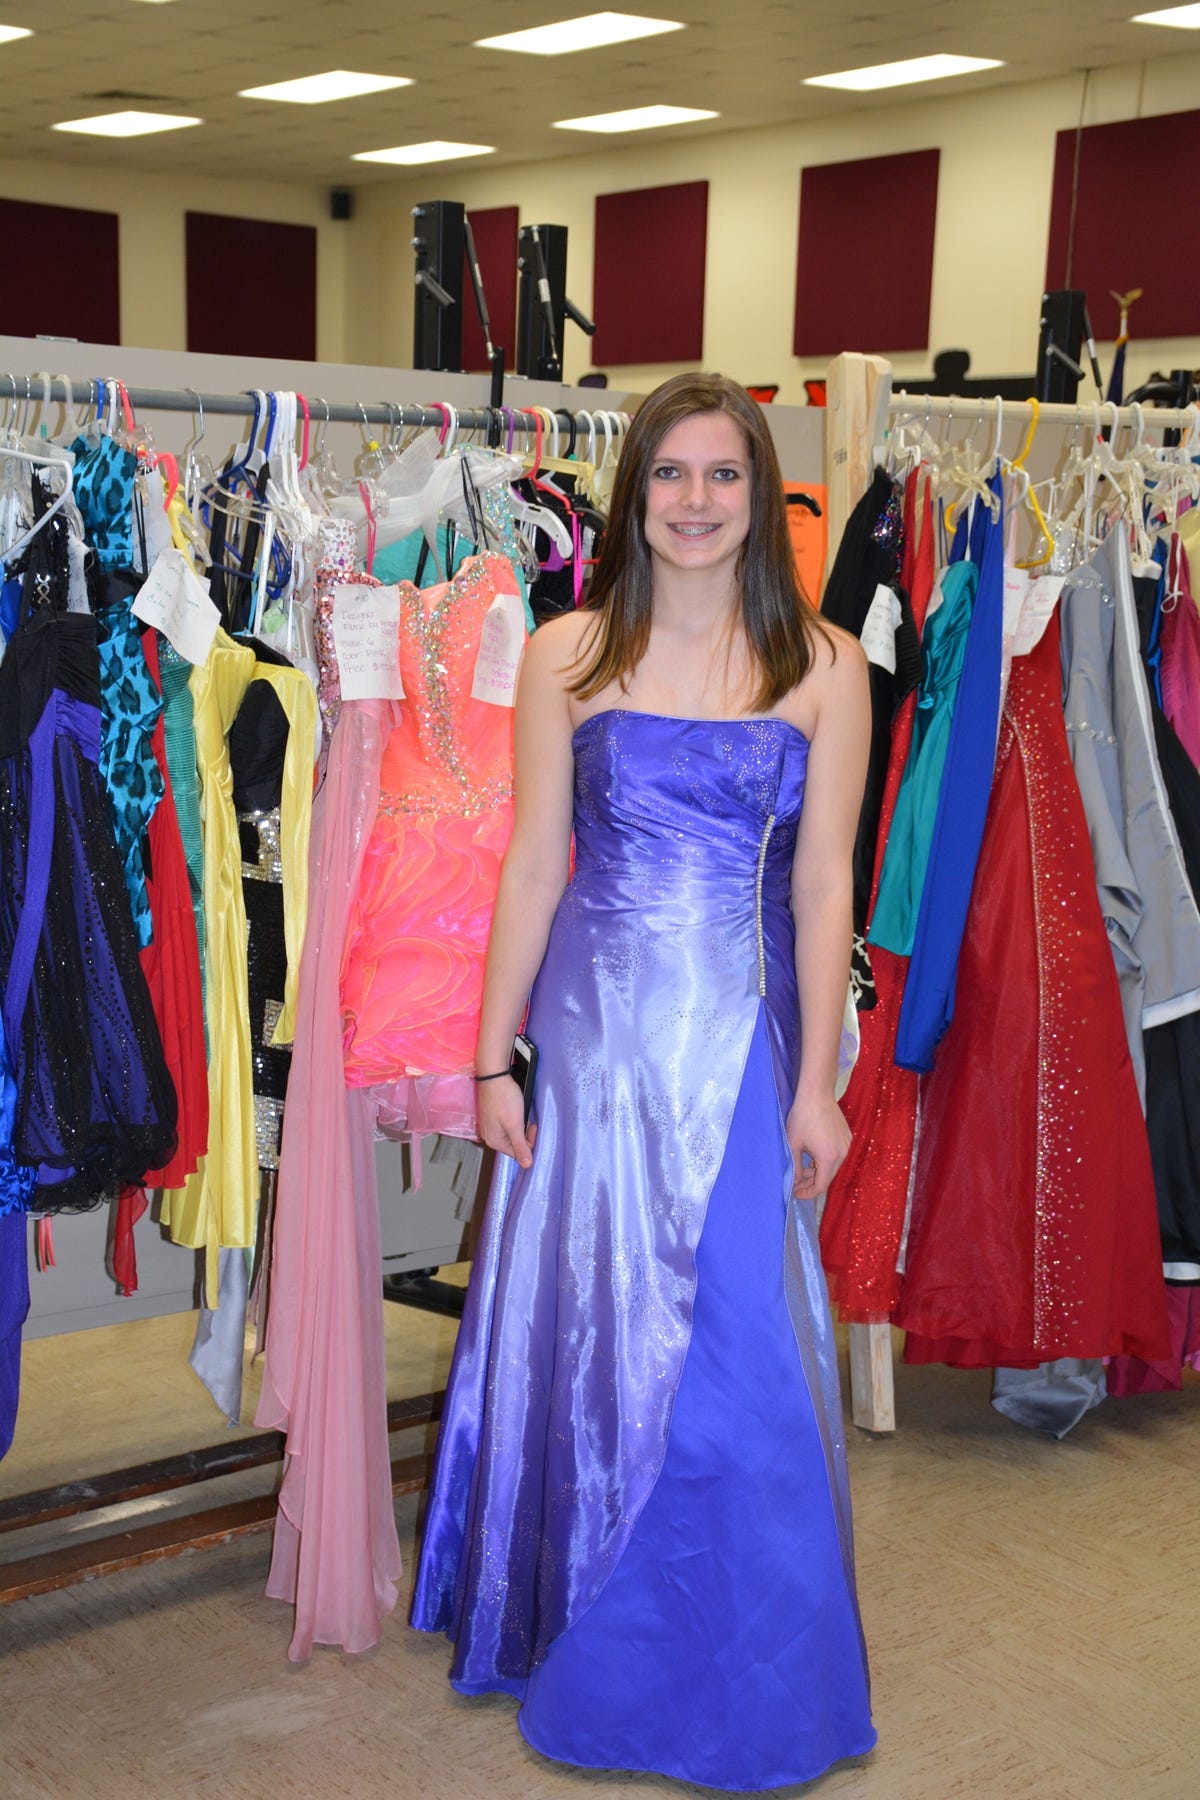 consignment shops that buy prom dresses